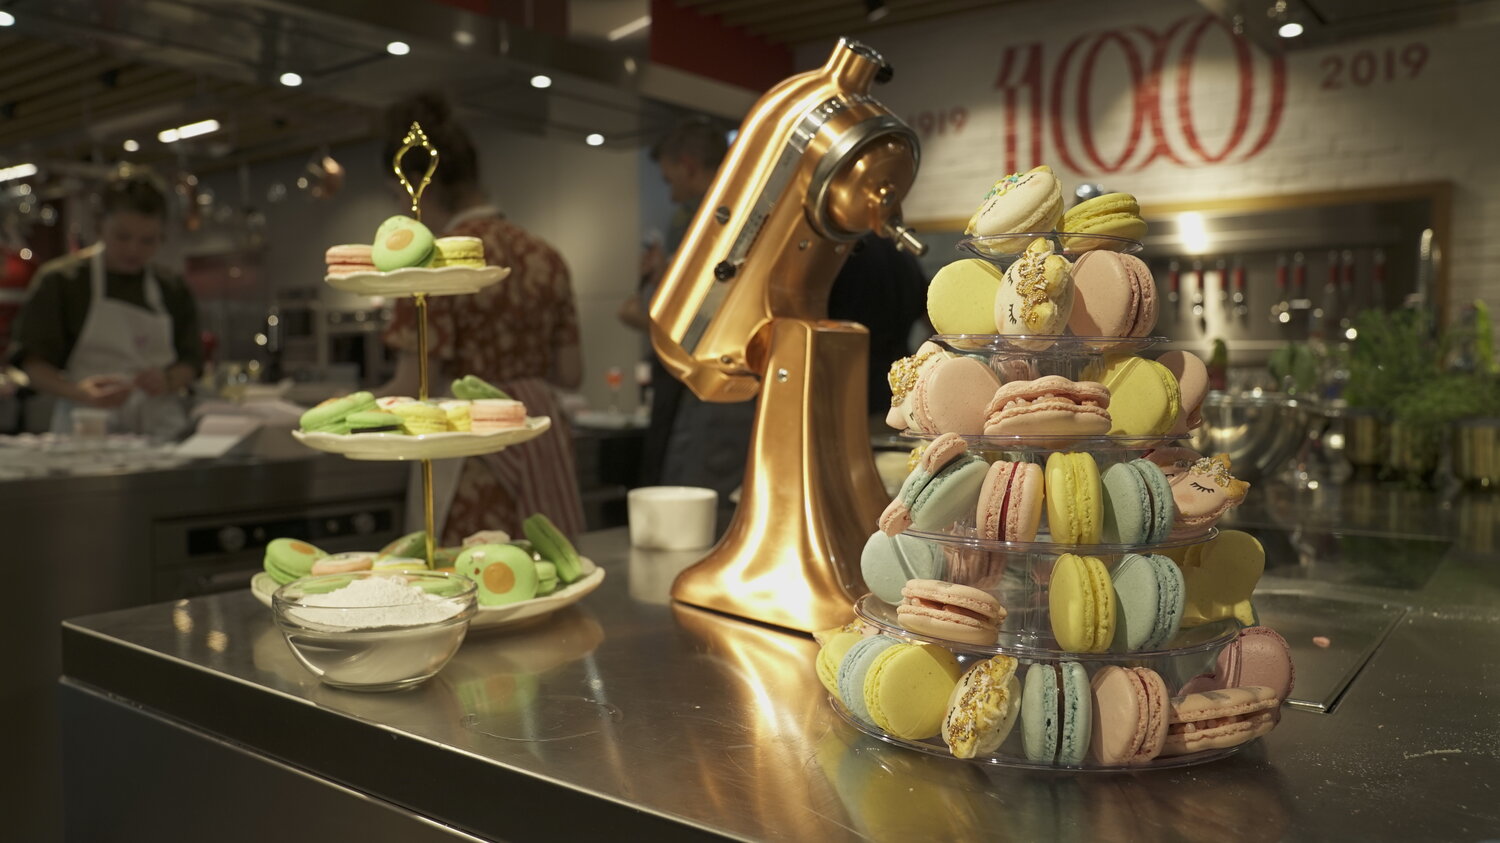 Celebrating Ohlala's macaron magic in one of the most inspiring kitchens in London!